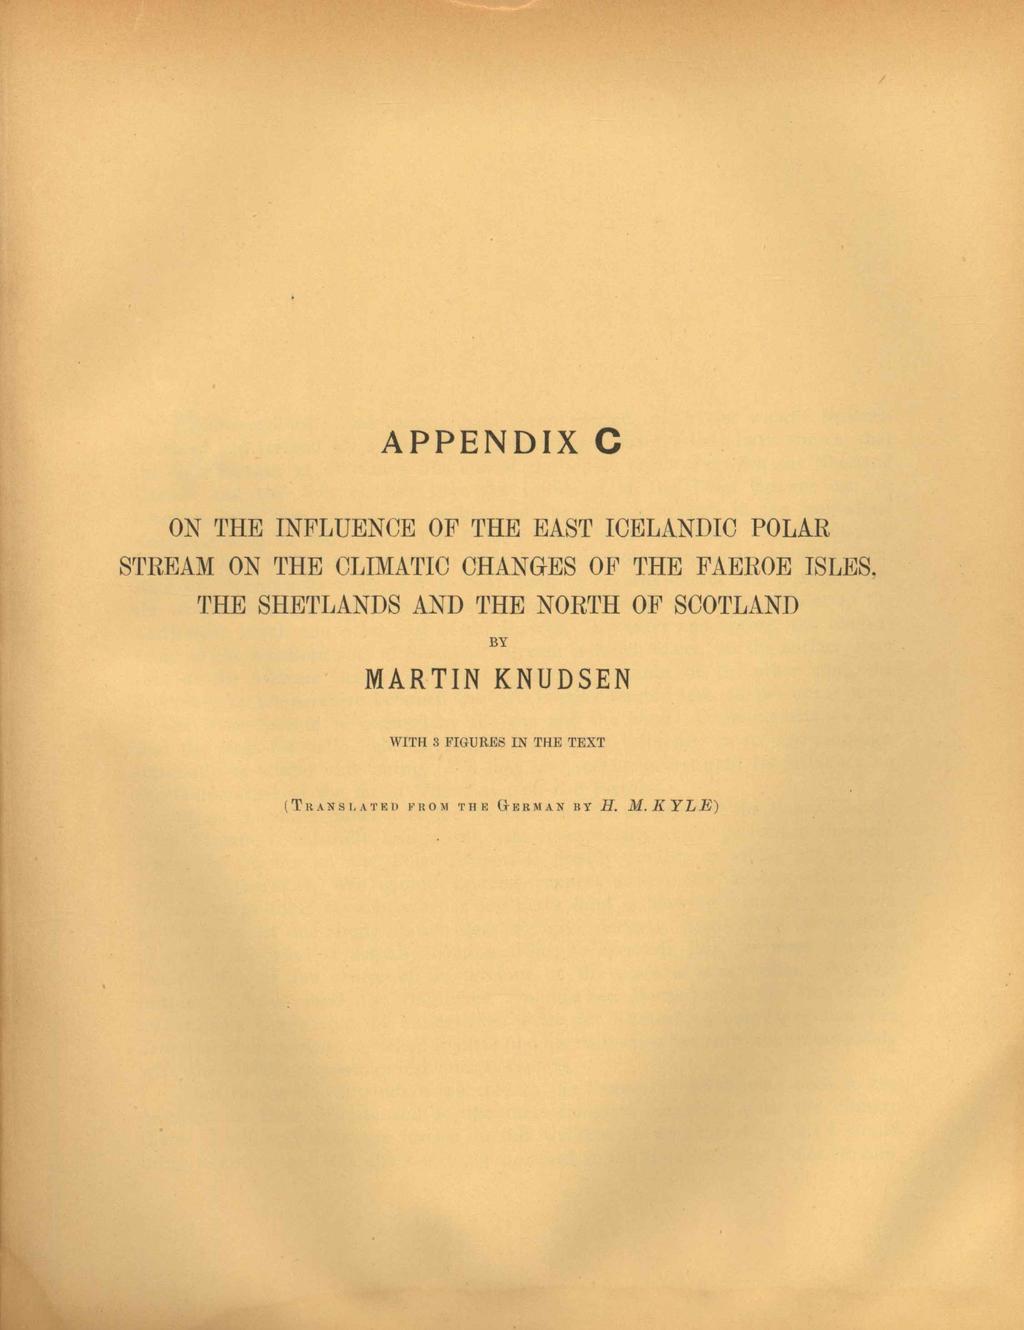 APPENDIX C ON THE INFLUENCE OF THE EAST ICELANDIC POLAR STREAM ON THE CLIMATIC CHANGES OF THE FAEROE ISLES, THE SHETLANDS